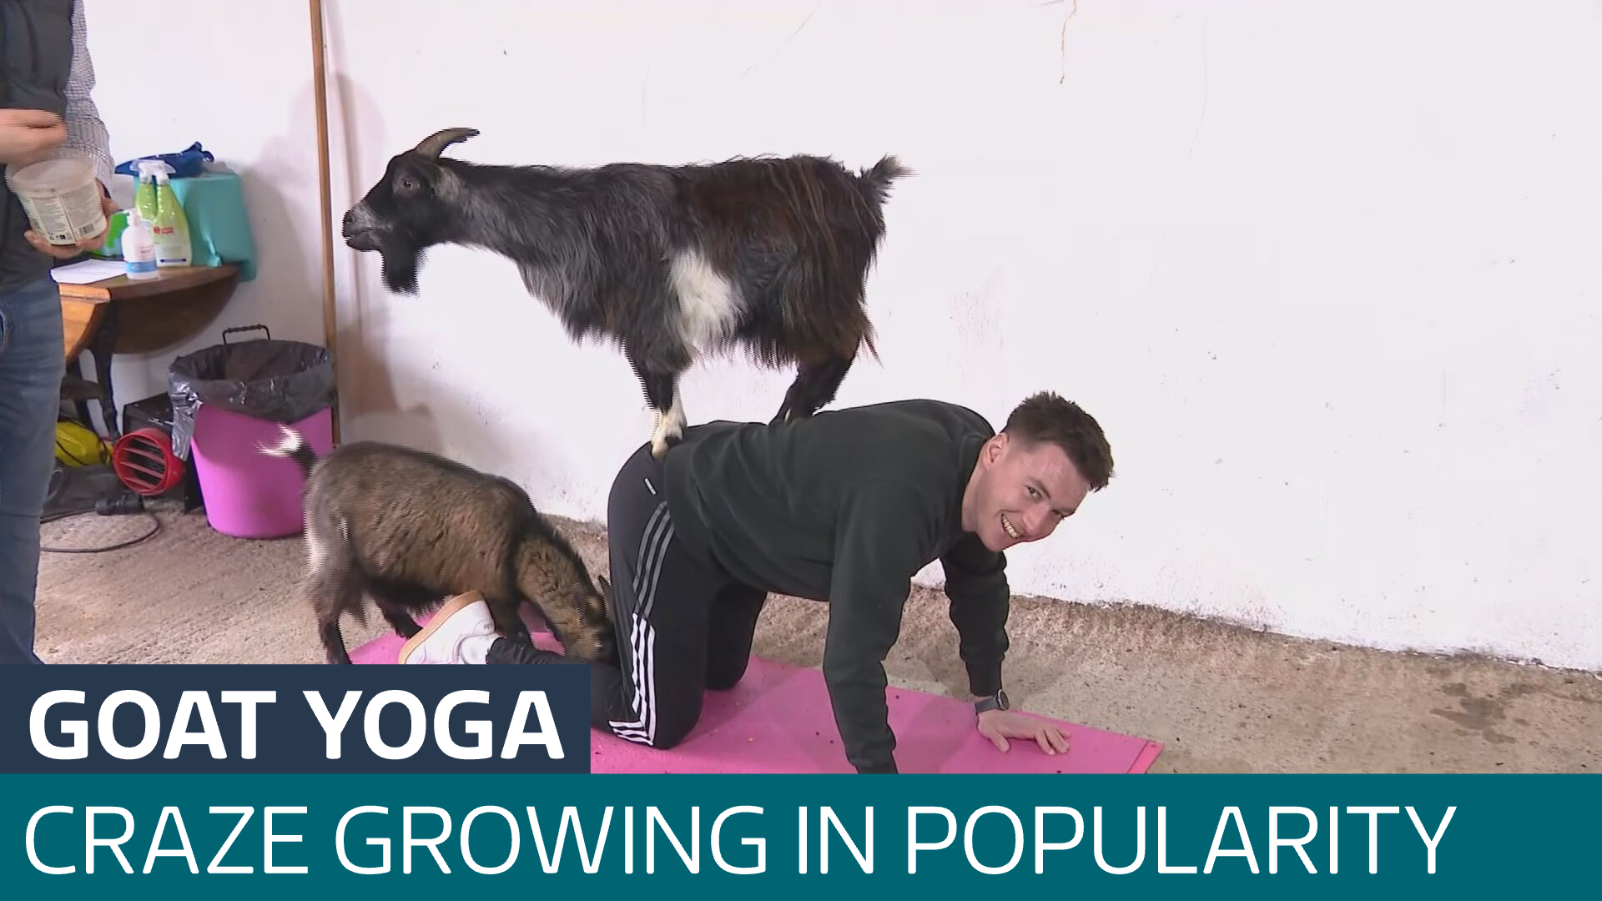 Goat yoga craze growing in popularity - Latest From ITV News